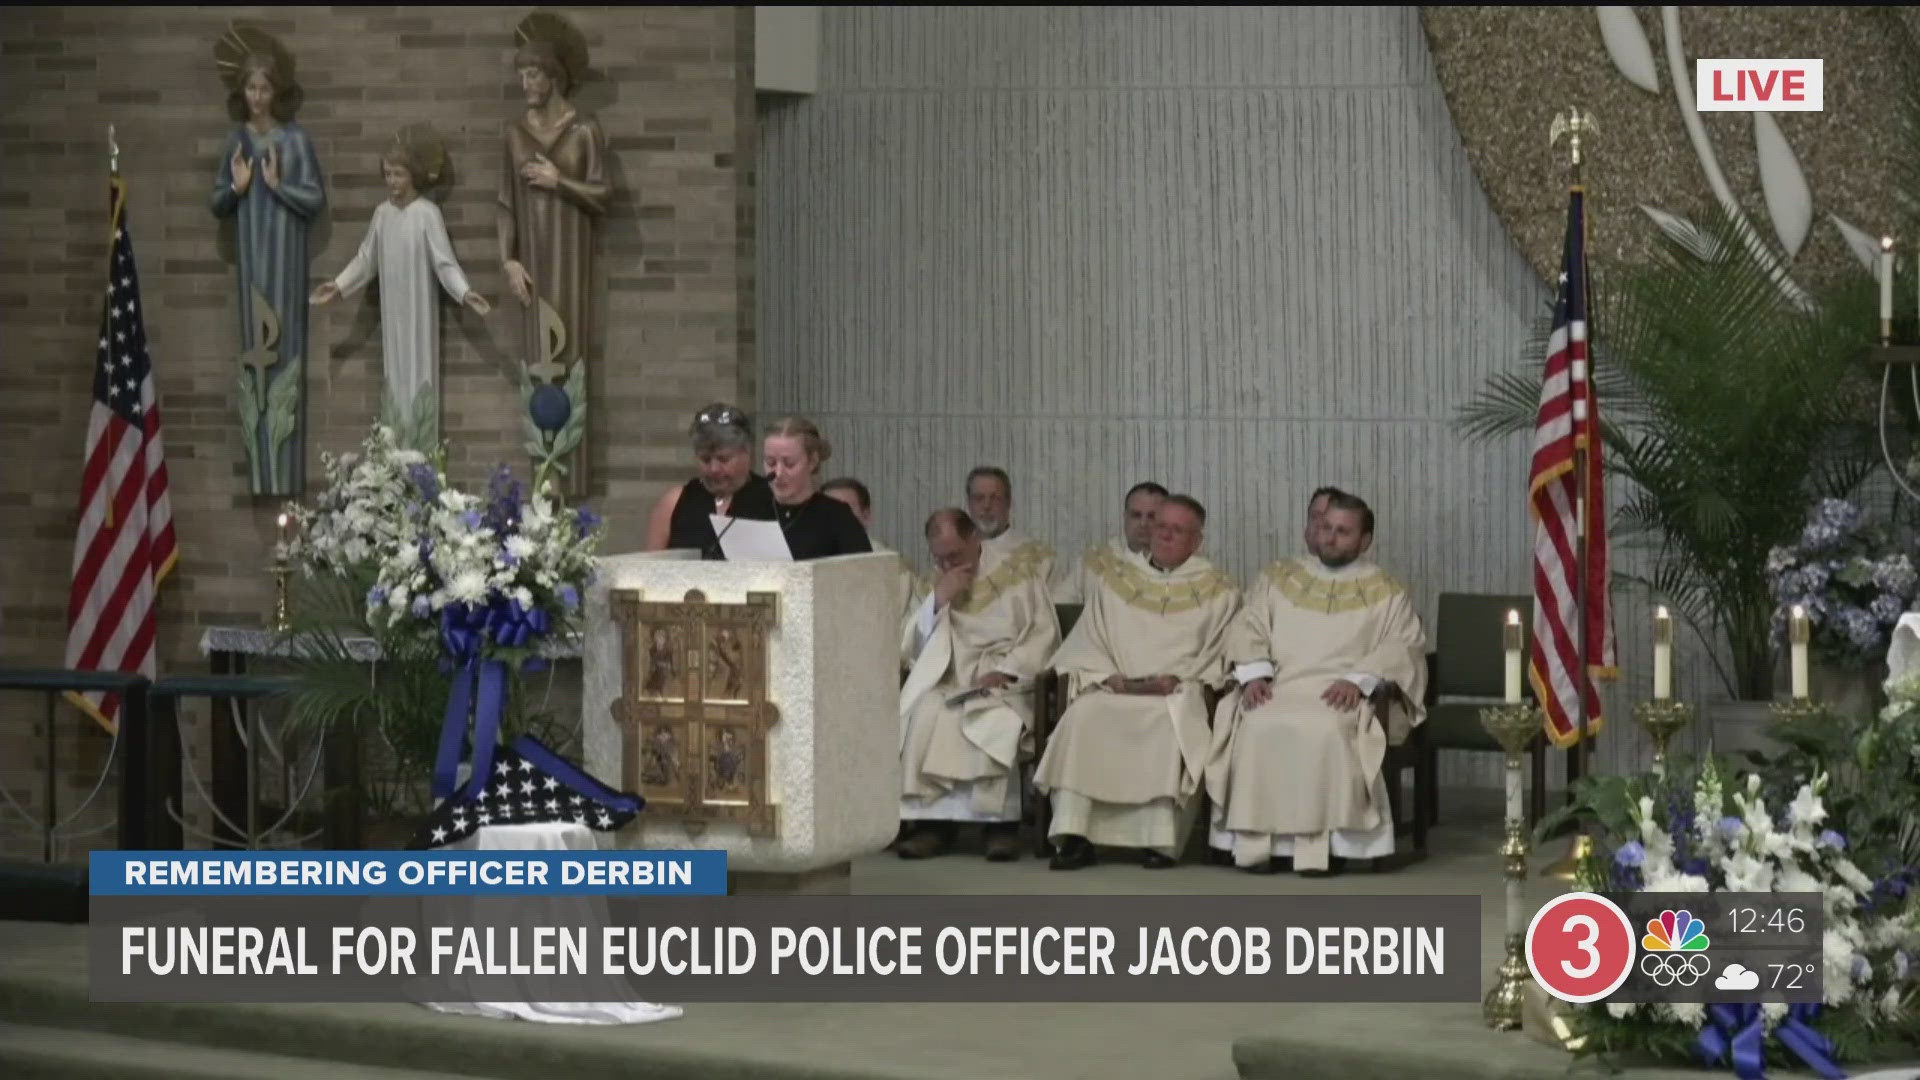 Funeral services are underway as the community gathers to pay their respects for Euclid police officer Jacob Derbin one week after he was shot and killed.